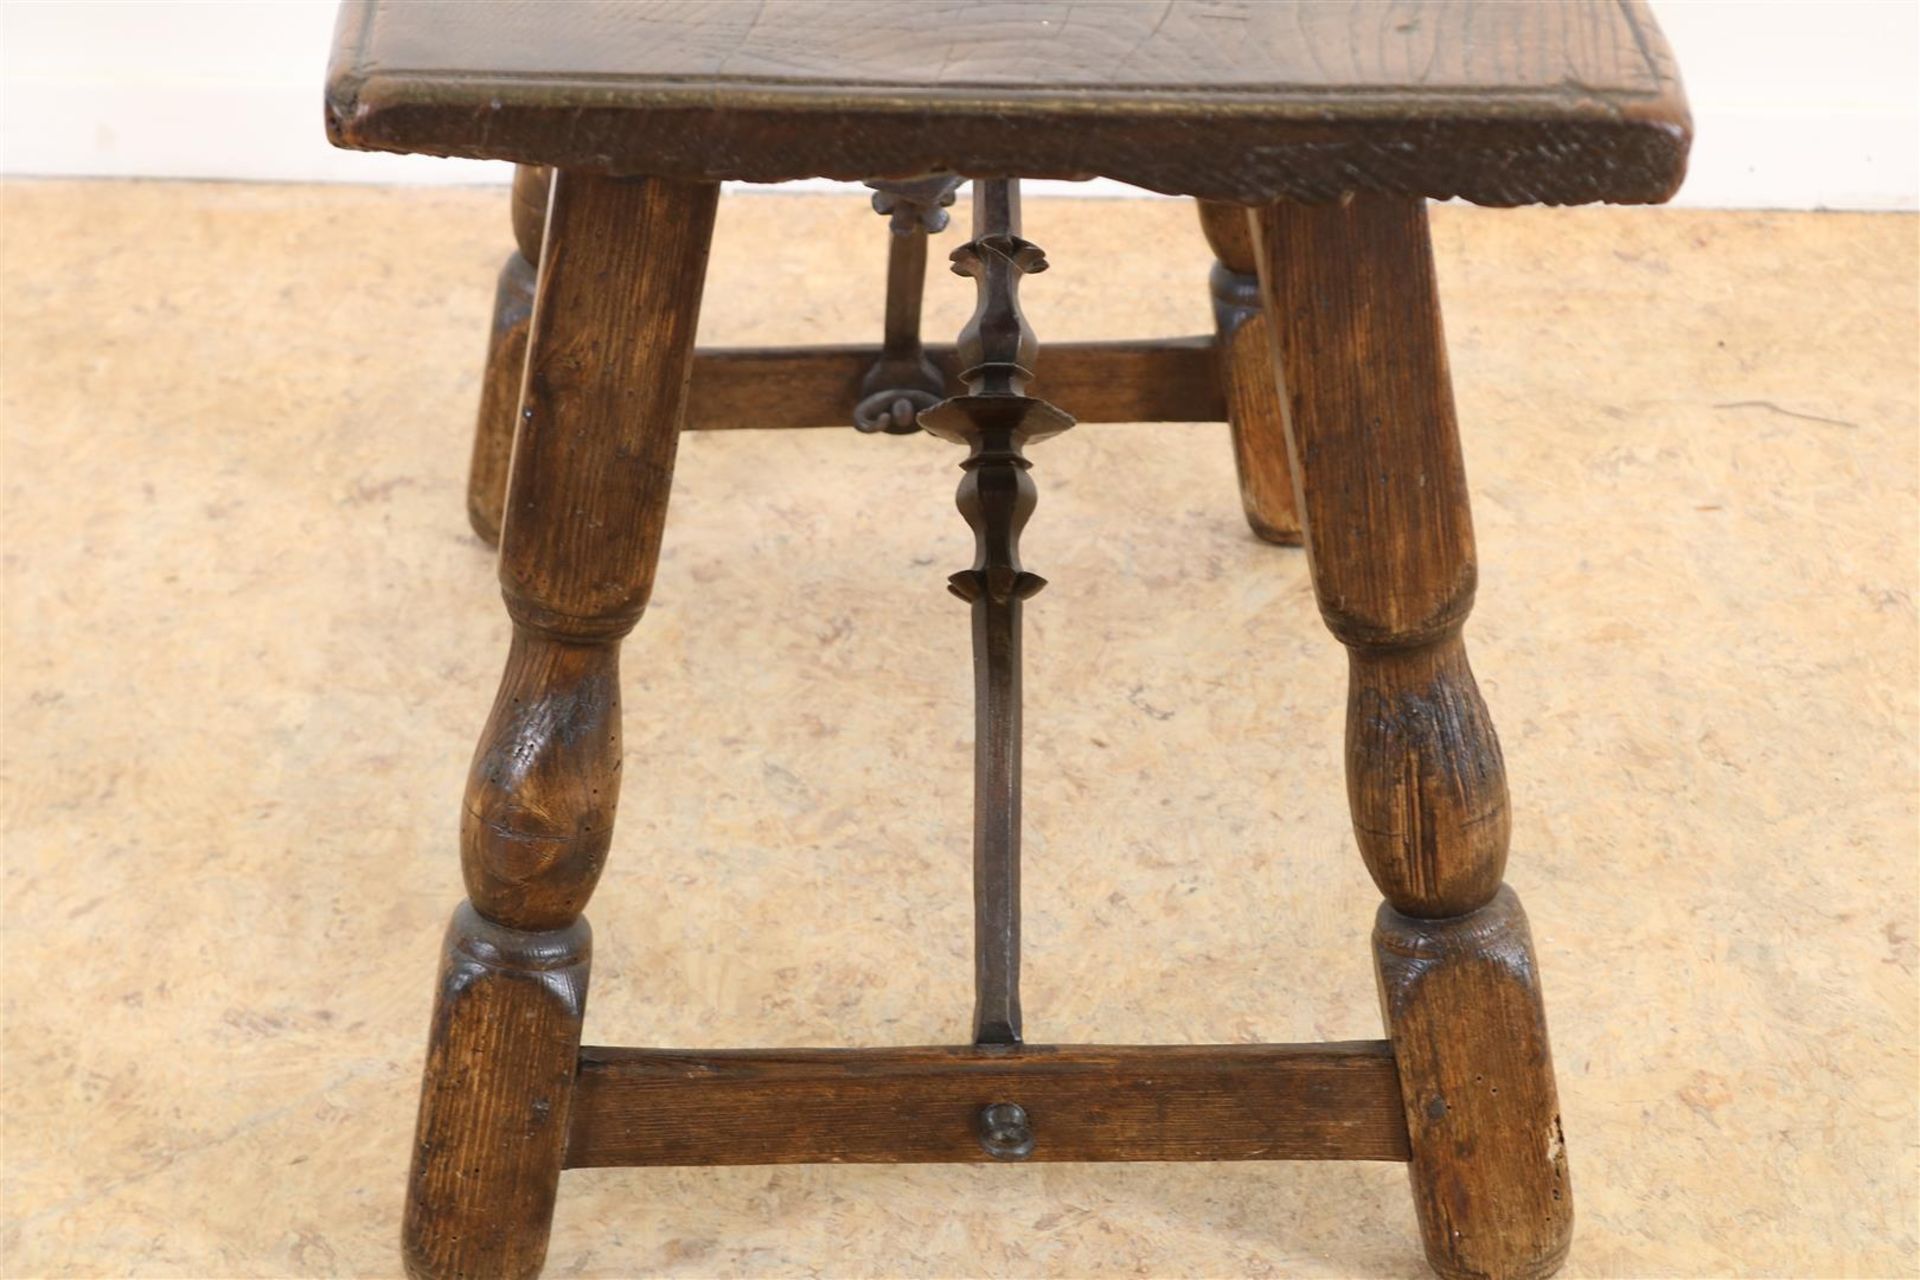 Chestnut wood table with wrought iron connections, Spain late 17th century, h. 48, w. 80, d. 40 - Image 3 of 3